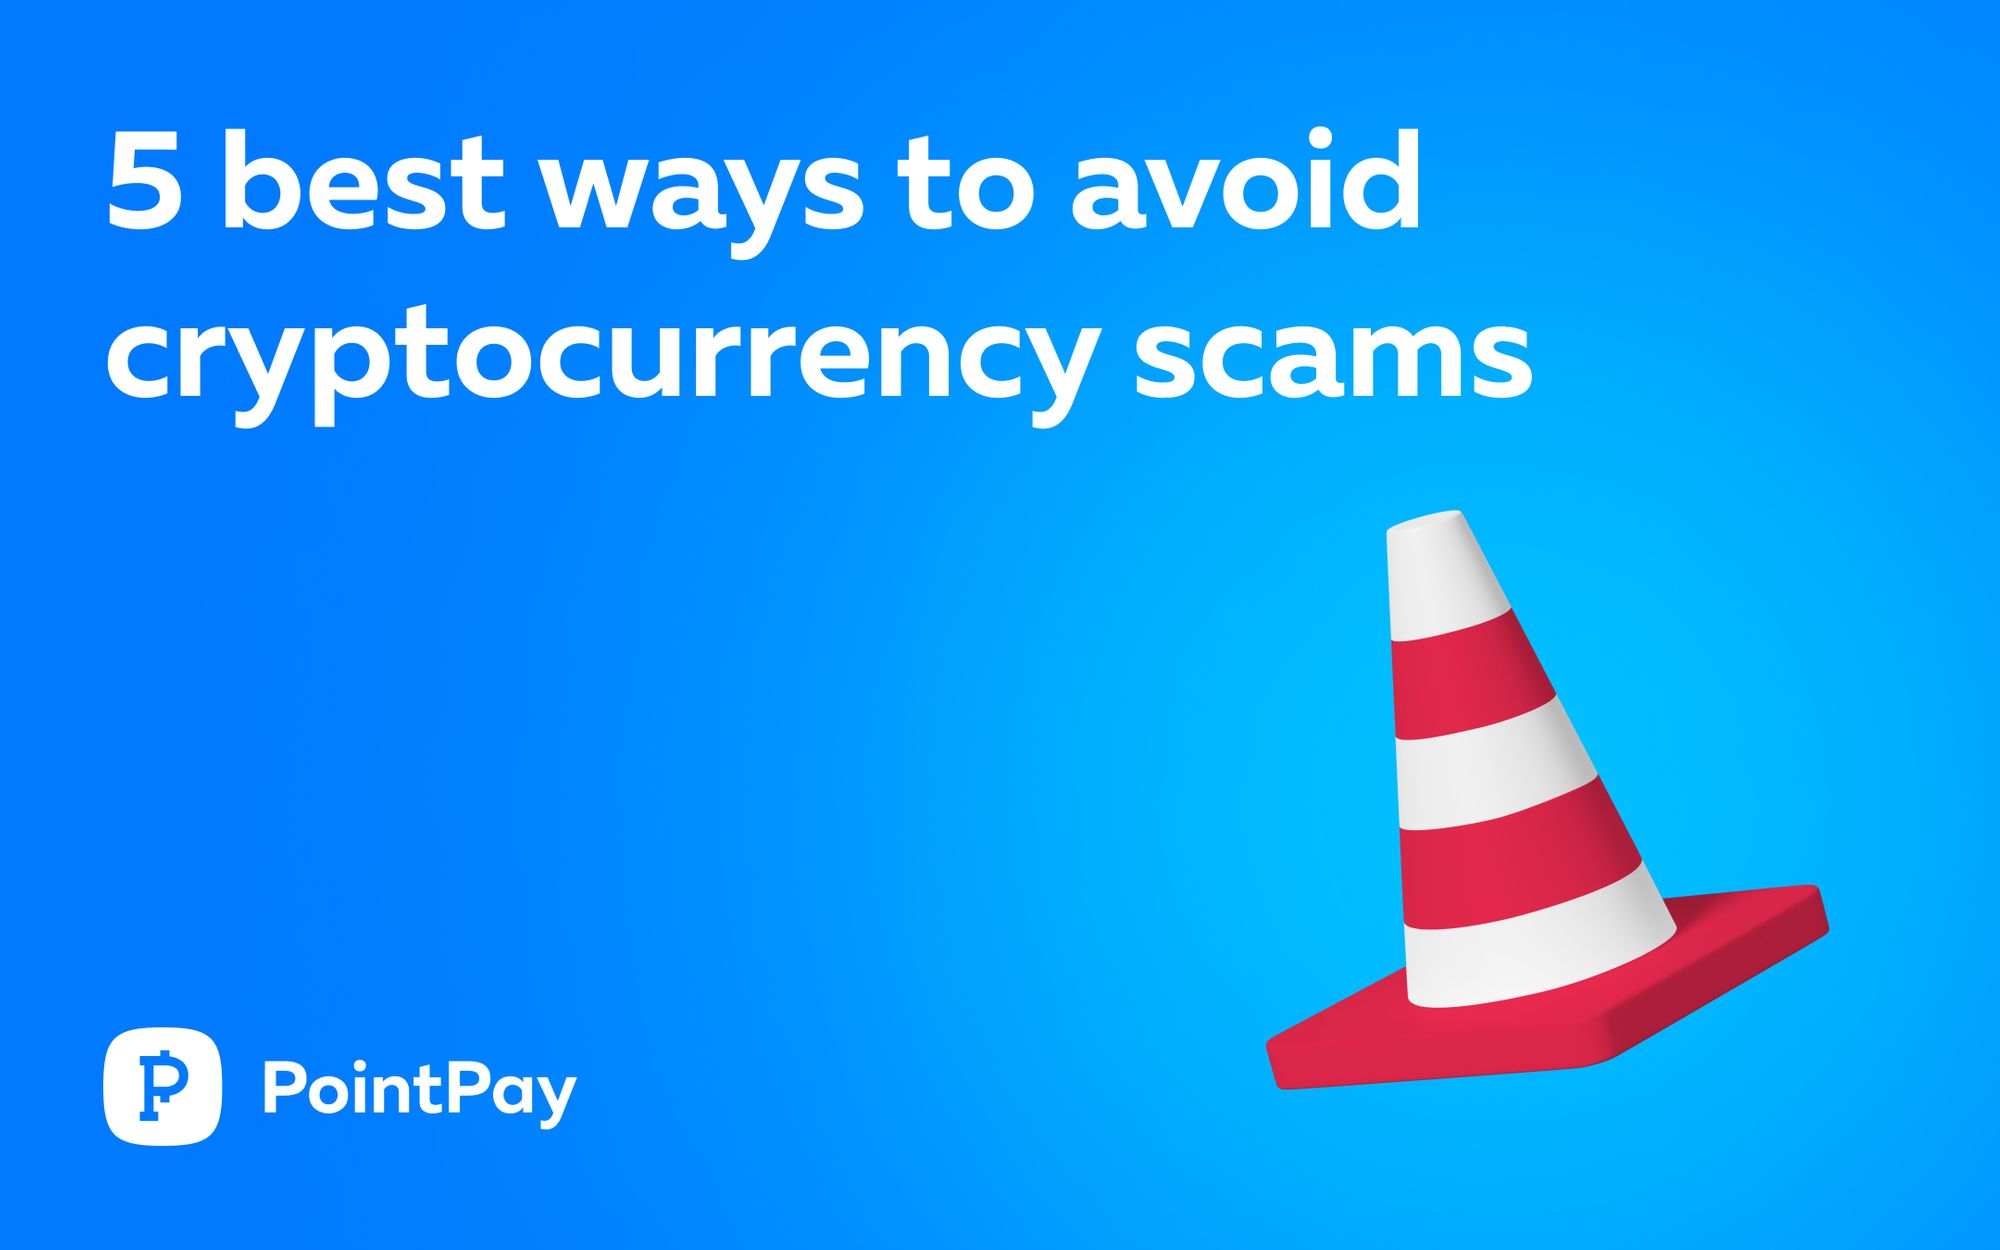 5 Best Ways to Avoid Cryptocurrency Scams